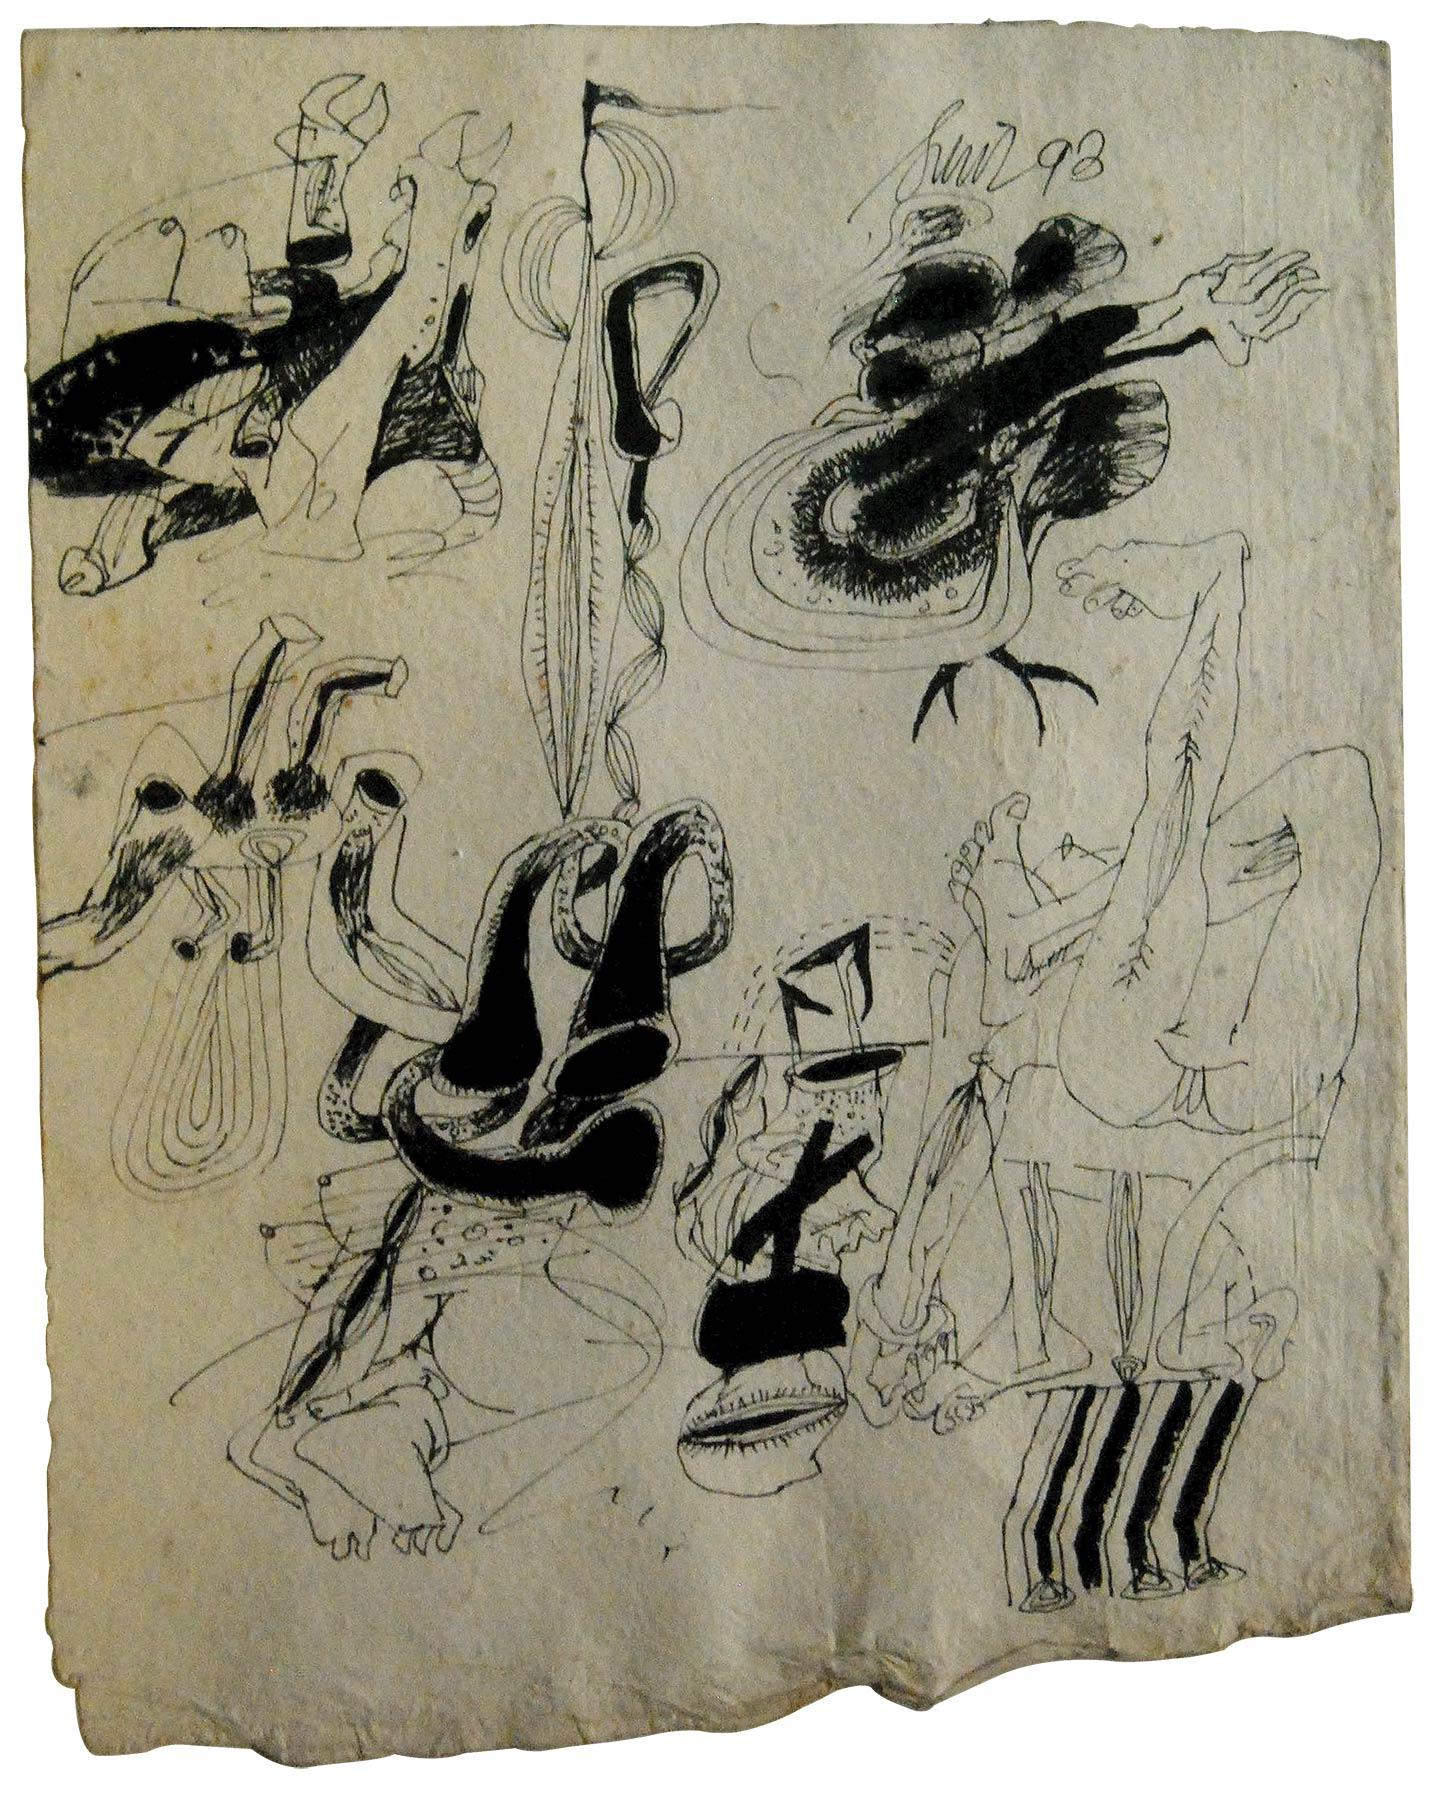 Sunil Das Abstract Painting - Drawings, Ink on Thick Paper, Black, White by Modern Indian Artist "In Stock"